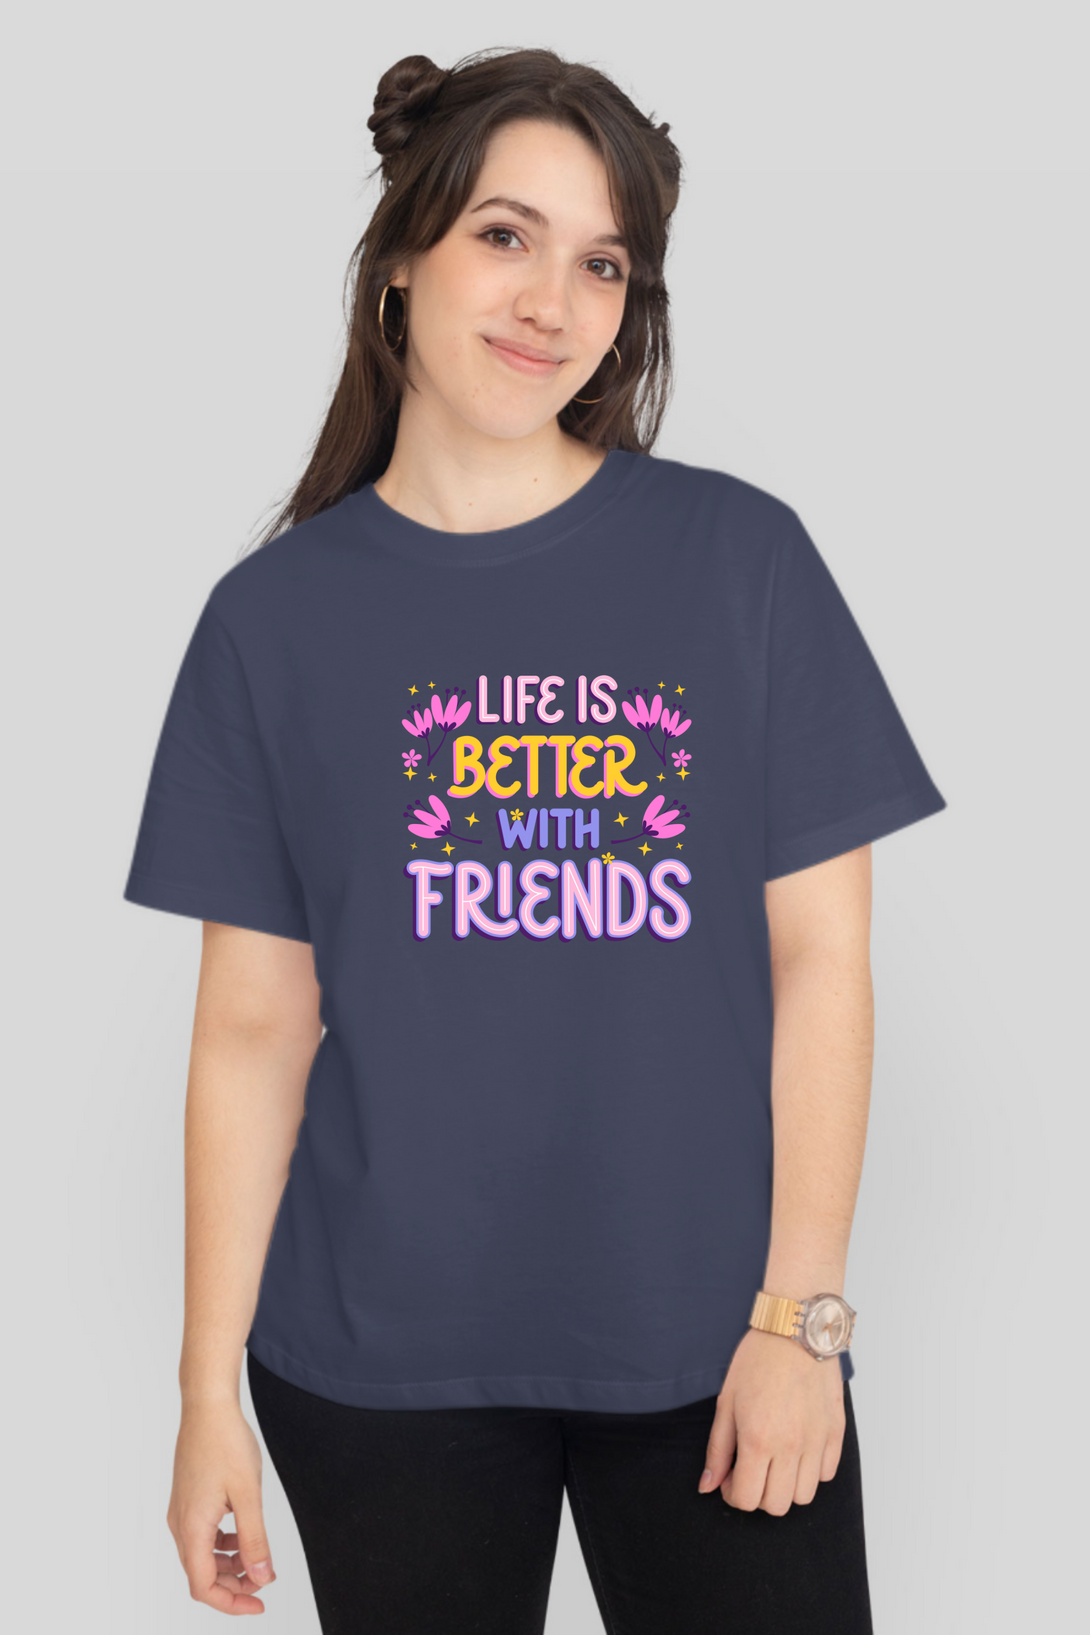 Life Is Better With Friends Printed T-Shirt For Women - WowWaves - 9